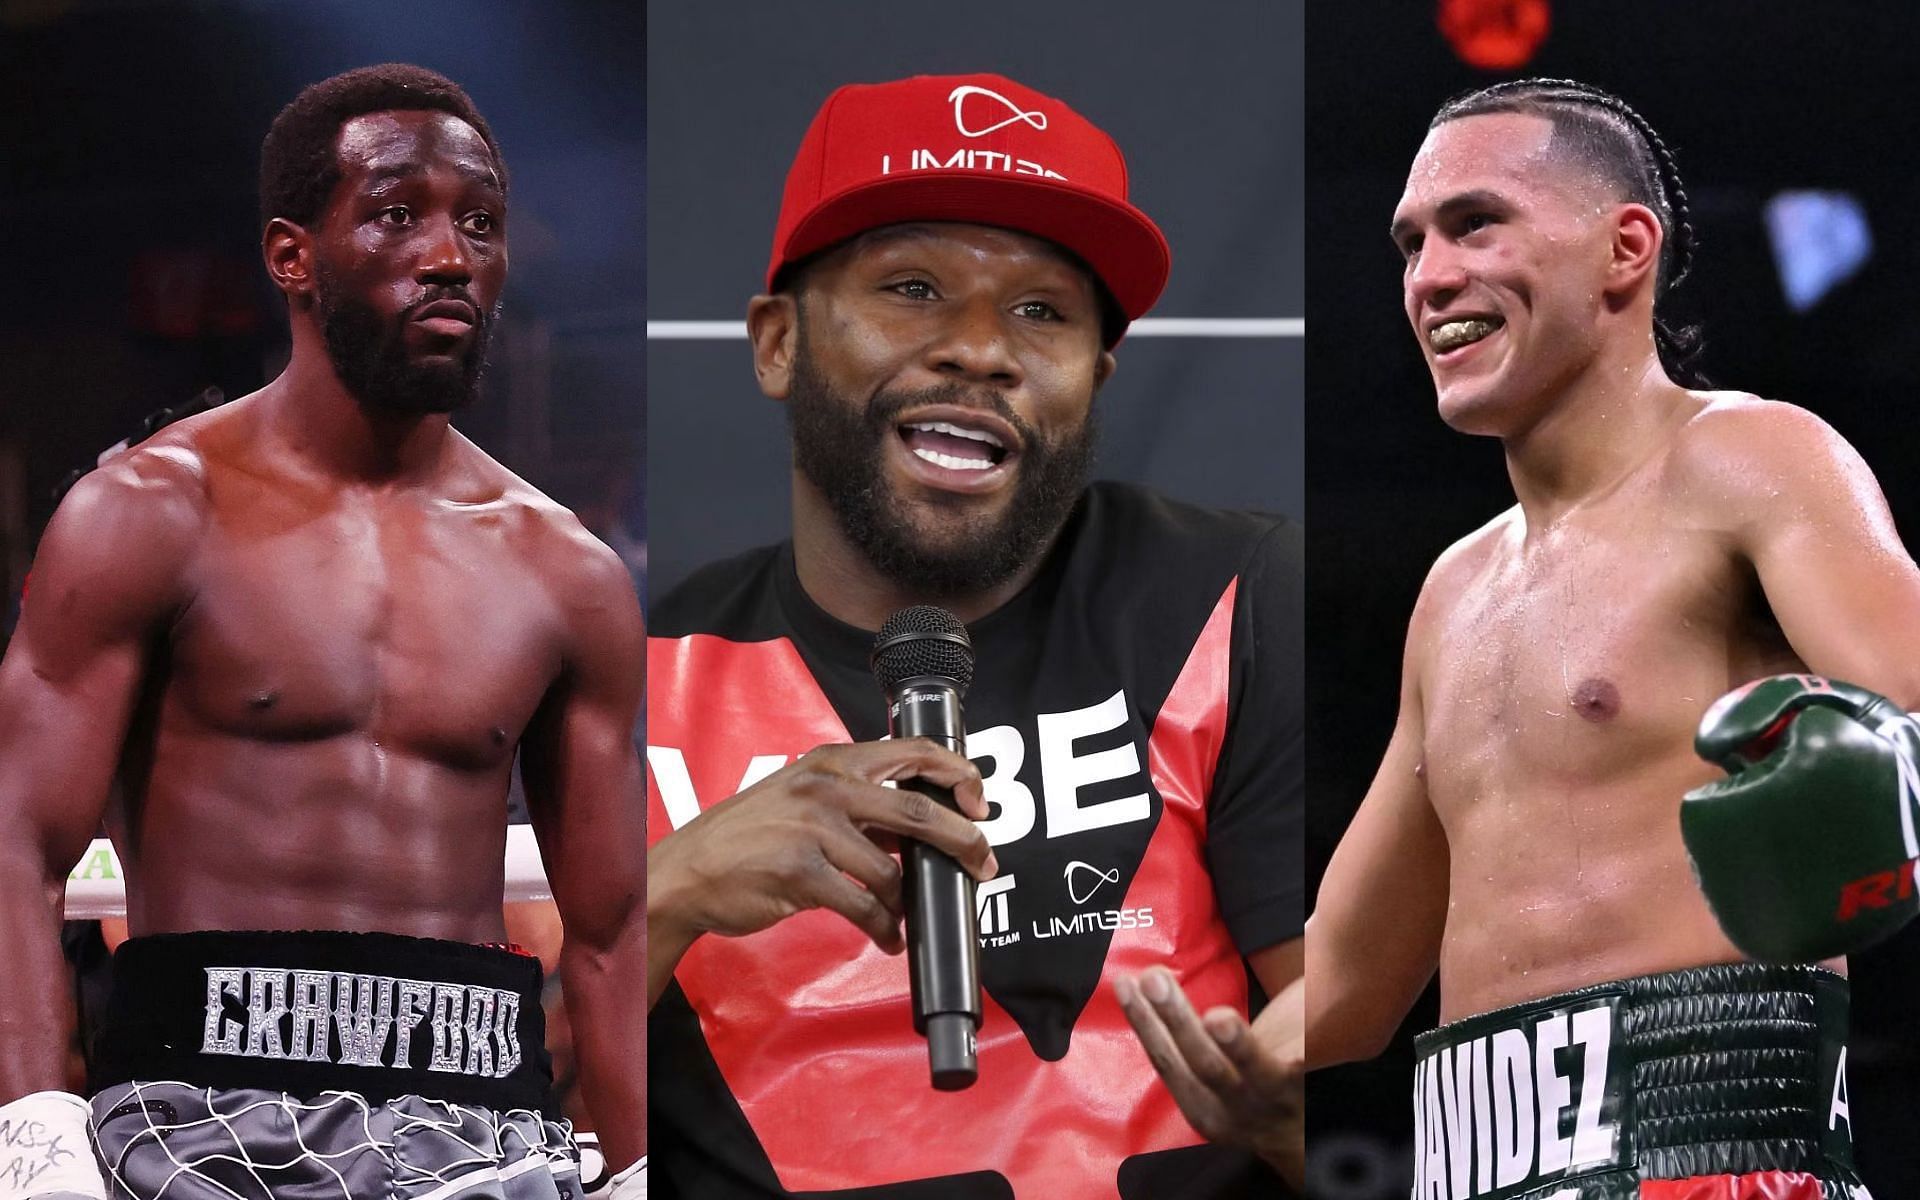 Floyd Mayweather (middle) suggests Terence Crawford (left) and David Benavidez (right) should fight at 168 pounds [Images Courtesy: @GettyImages]